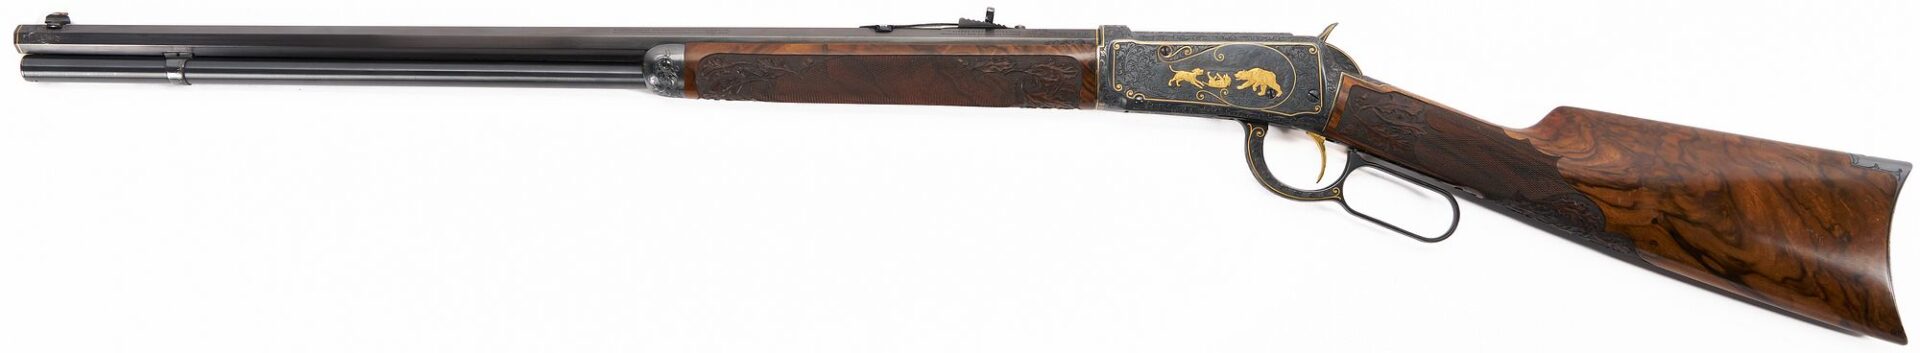 Lot 524: Custom Angelo Bee Gold Engraved Winchester Model 1894 .30 WCF